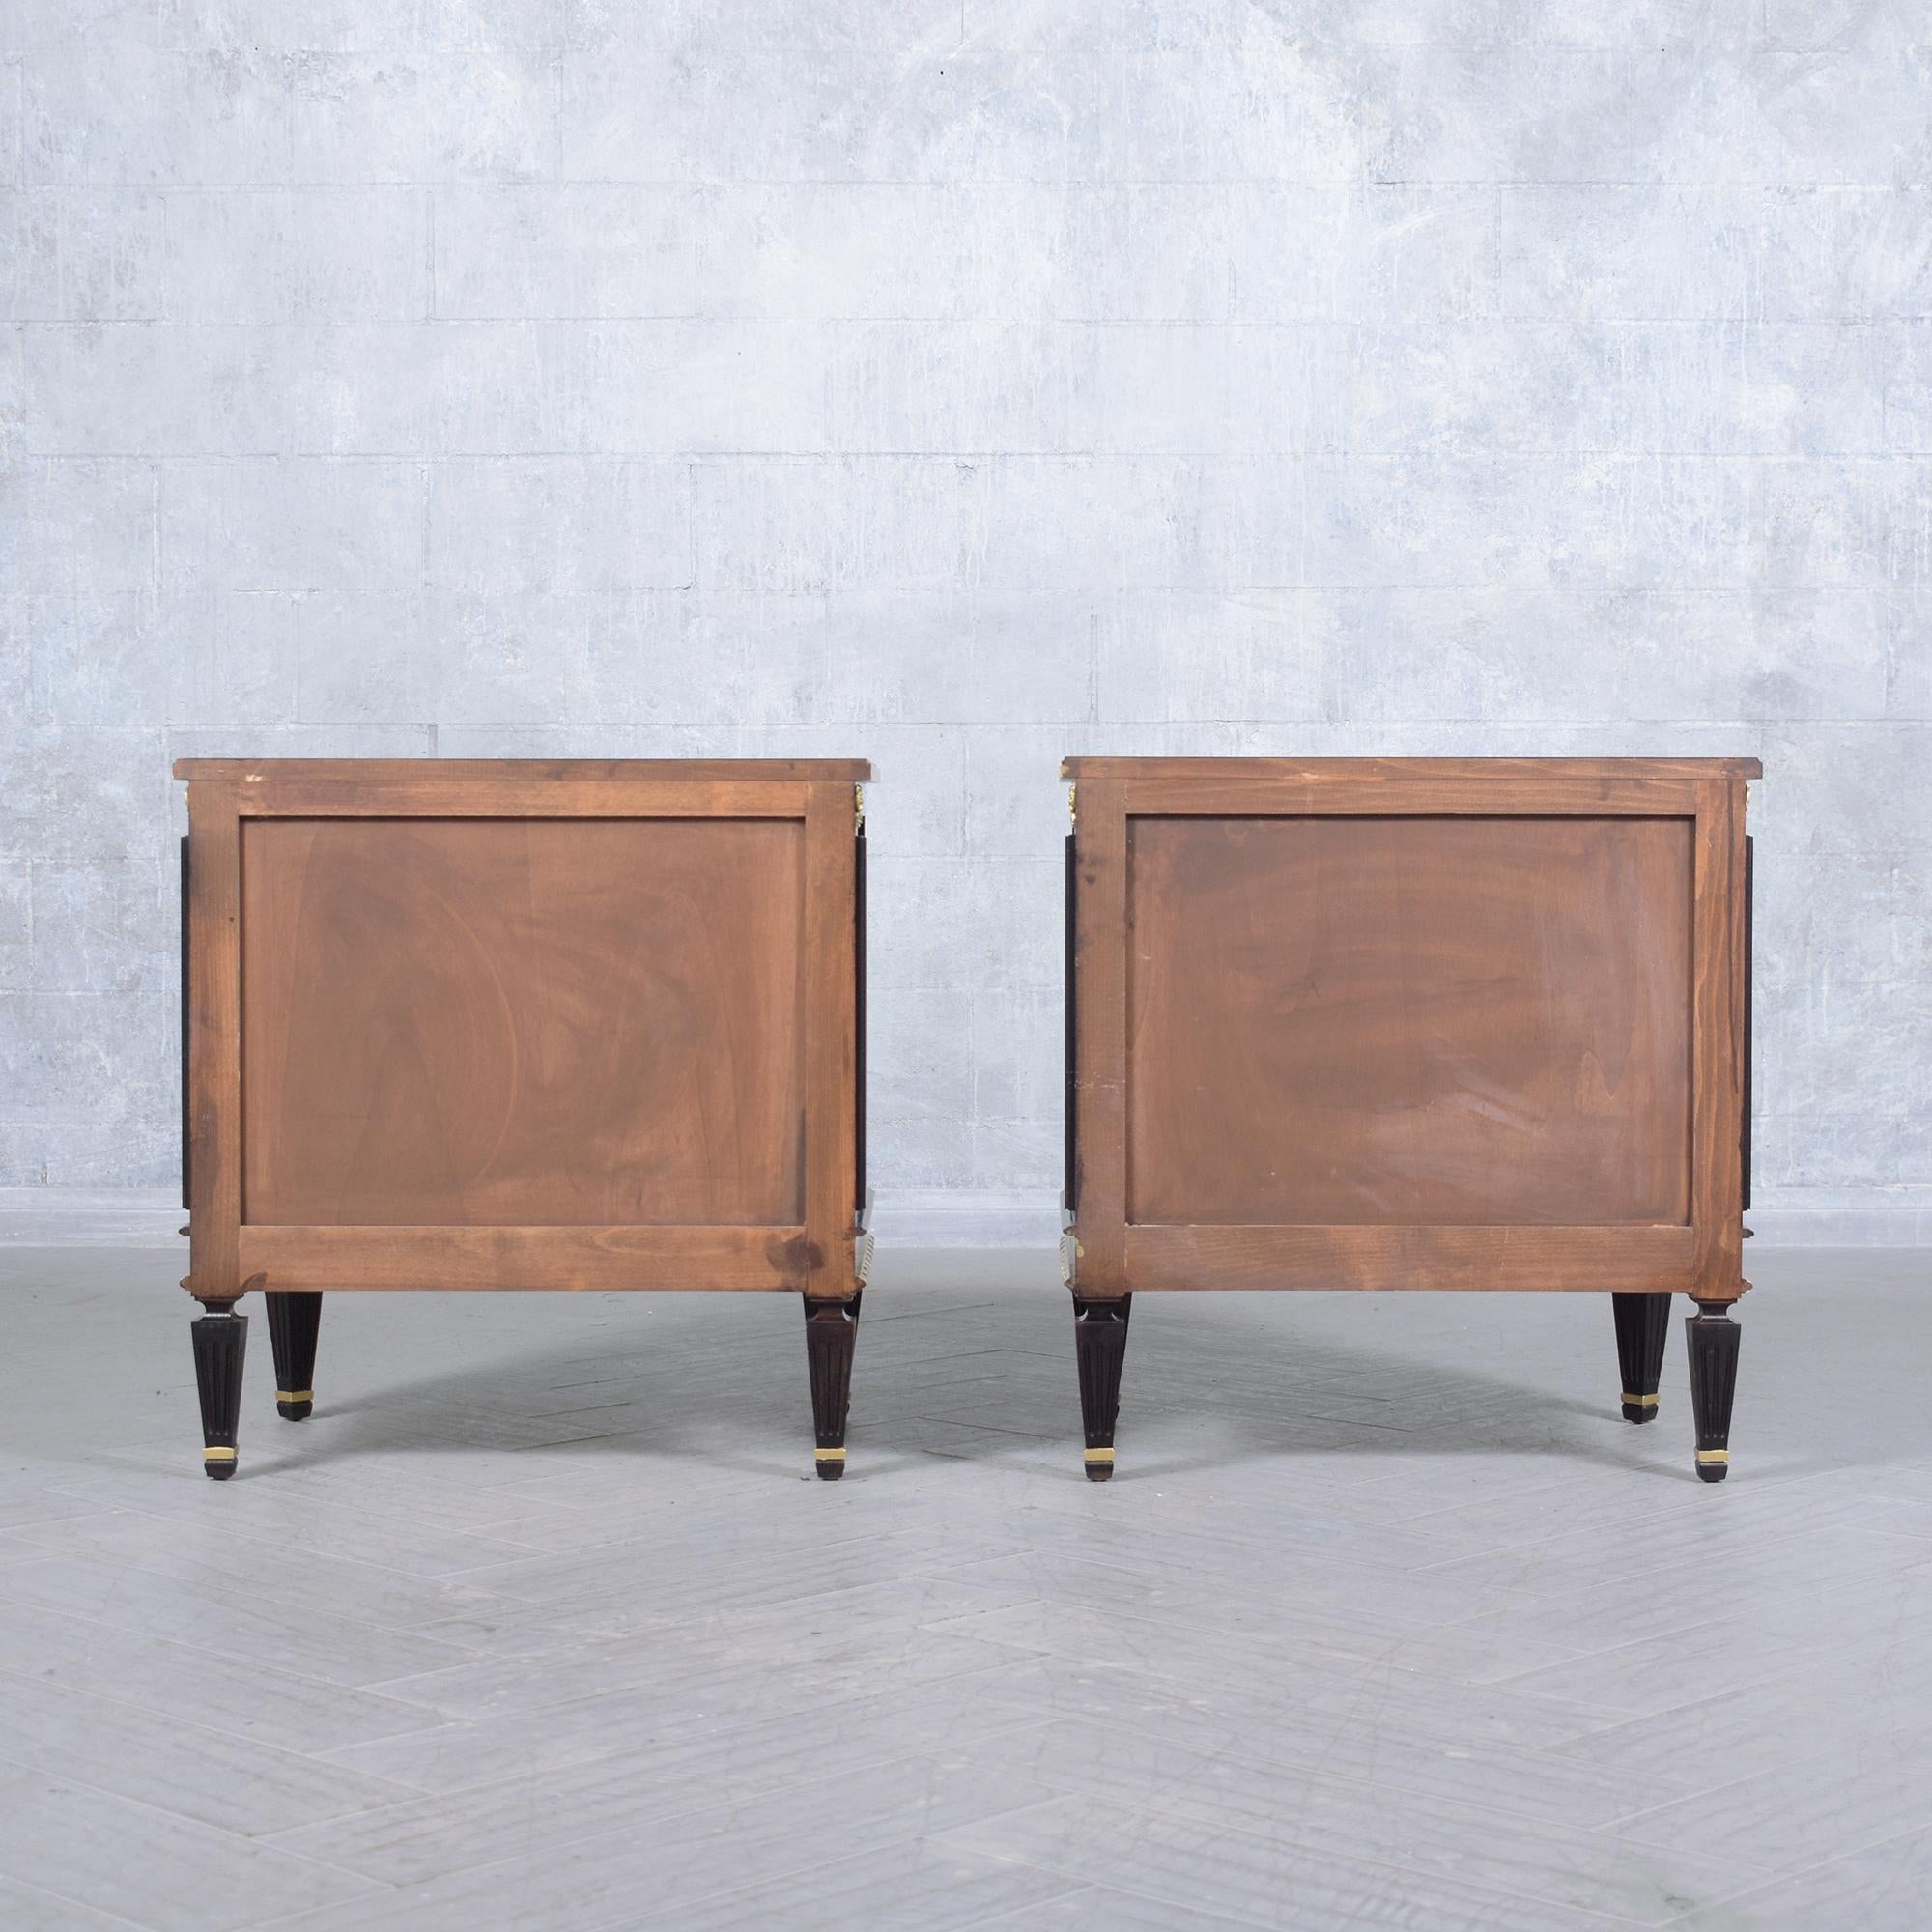 Vintage Louis XVI Mahogany Commodes: Timeless Nightstands for the Modern Home 10